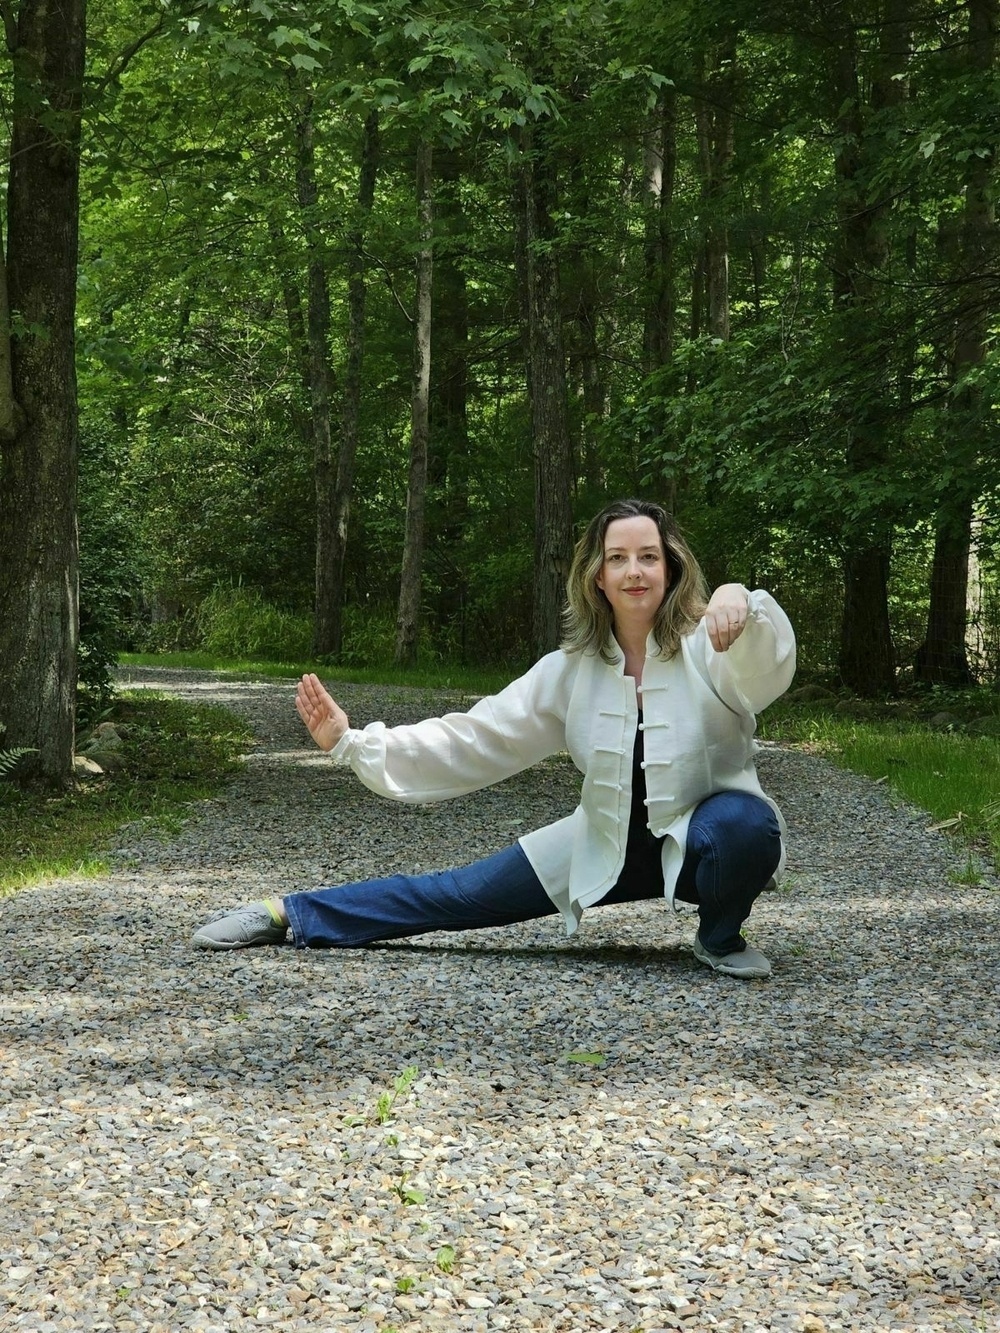 Auto-generated description: A woman performs a martial arts pose on a gravel path in a wooded area.